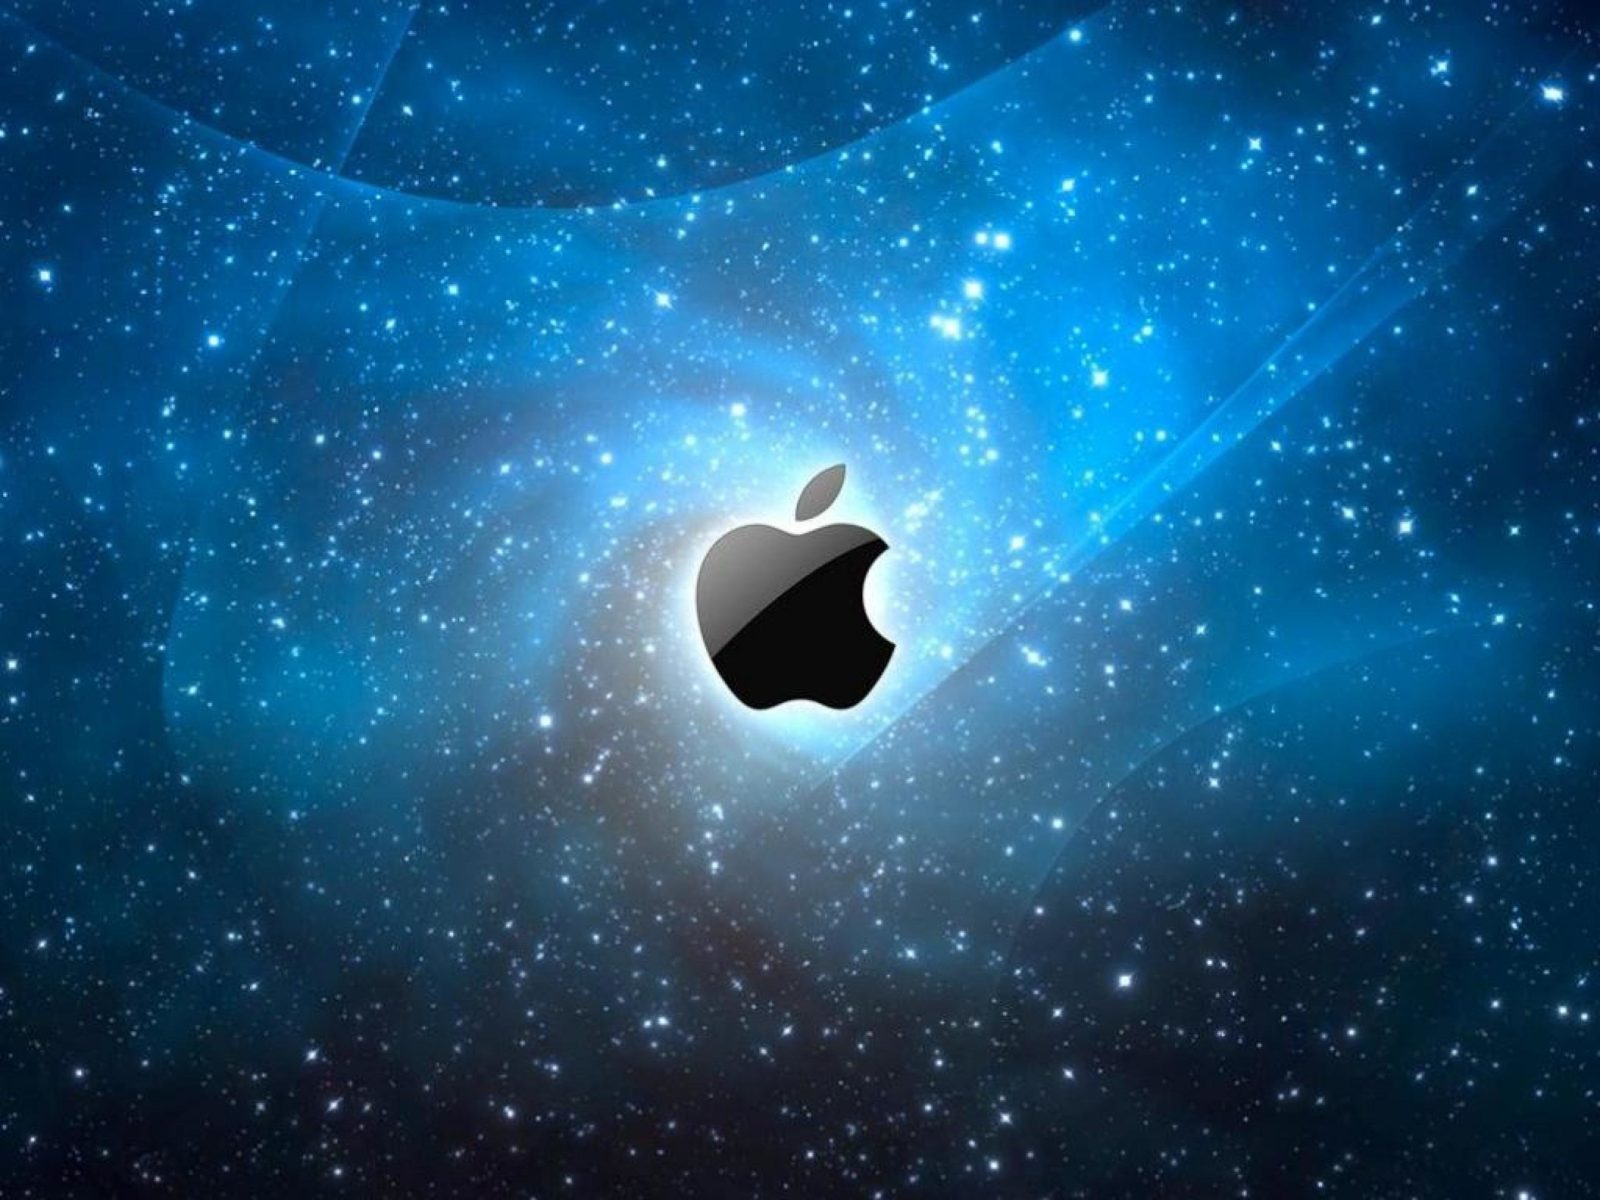 Apple Logo In Space Cool Wallpapers 3d Design – HD Wallpapers Backgrounds Desktop, iphone & Android Free Download